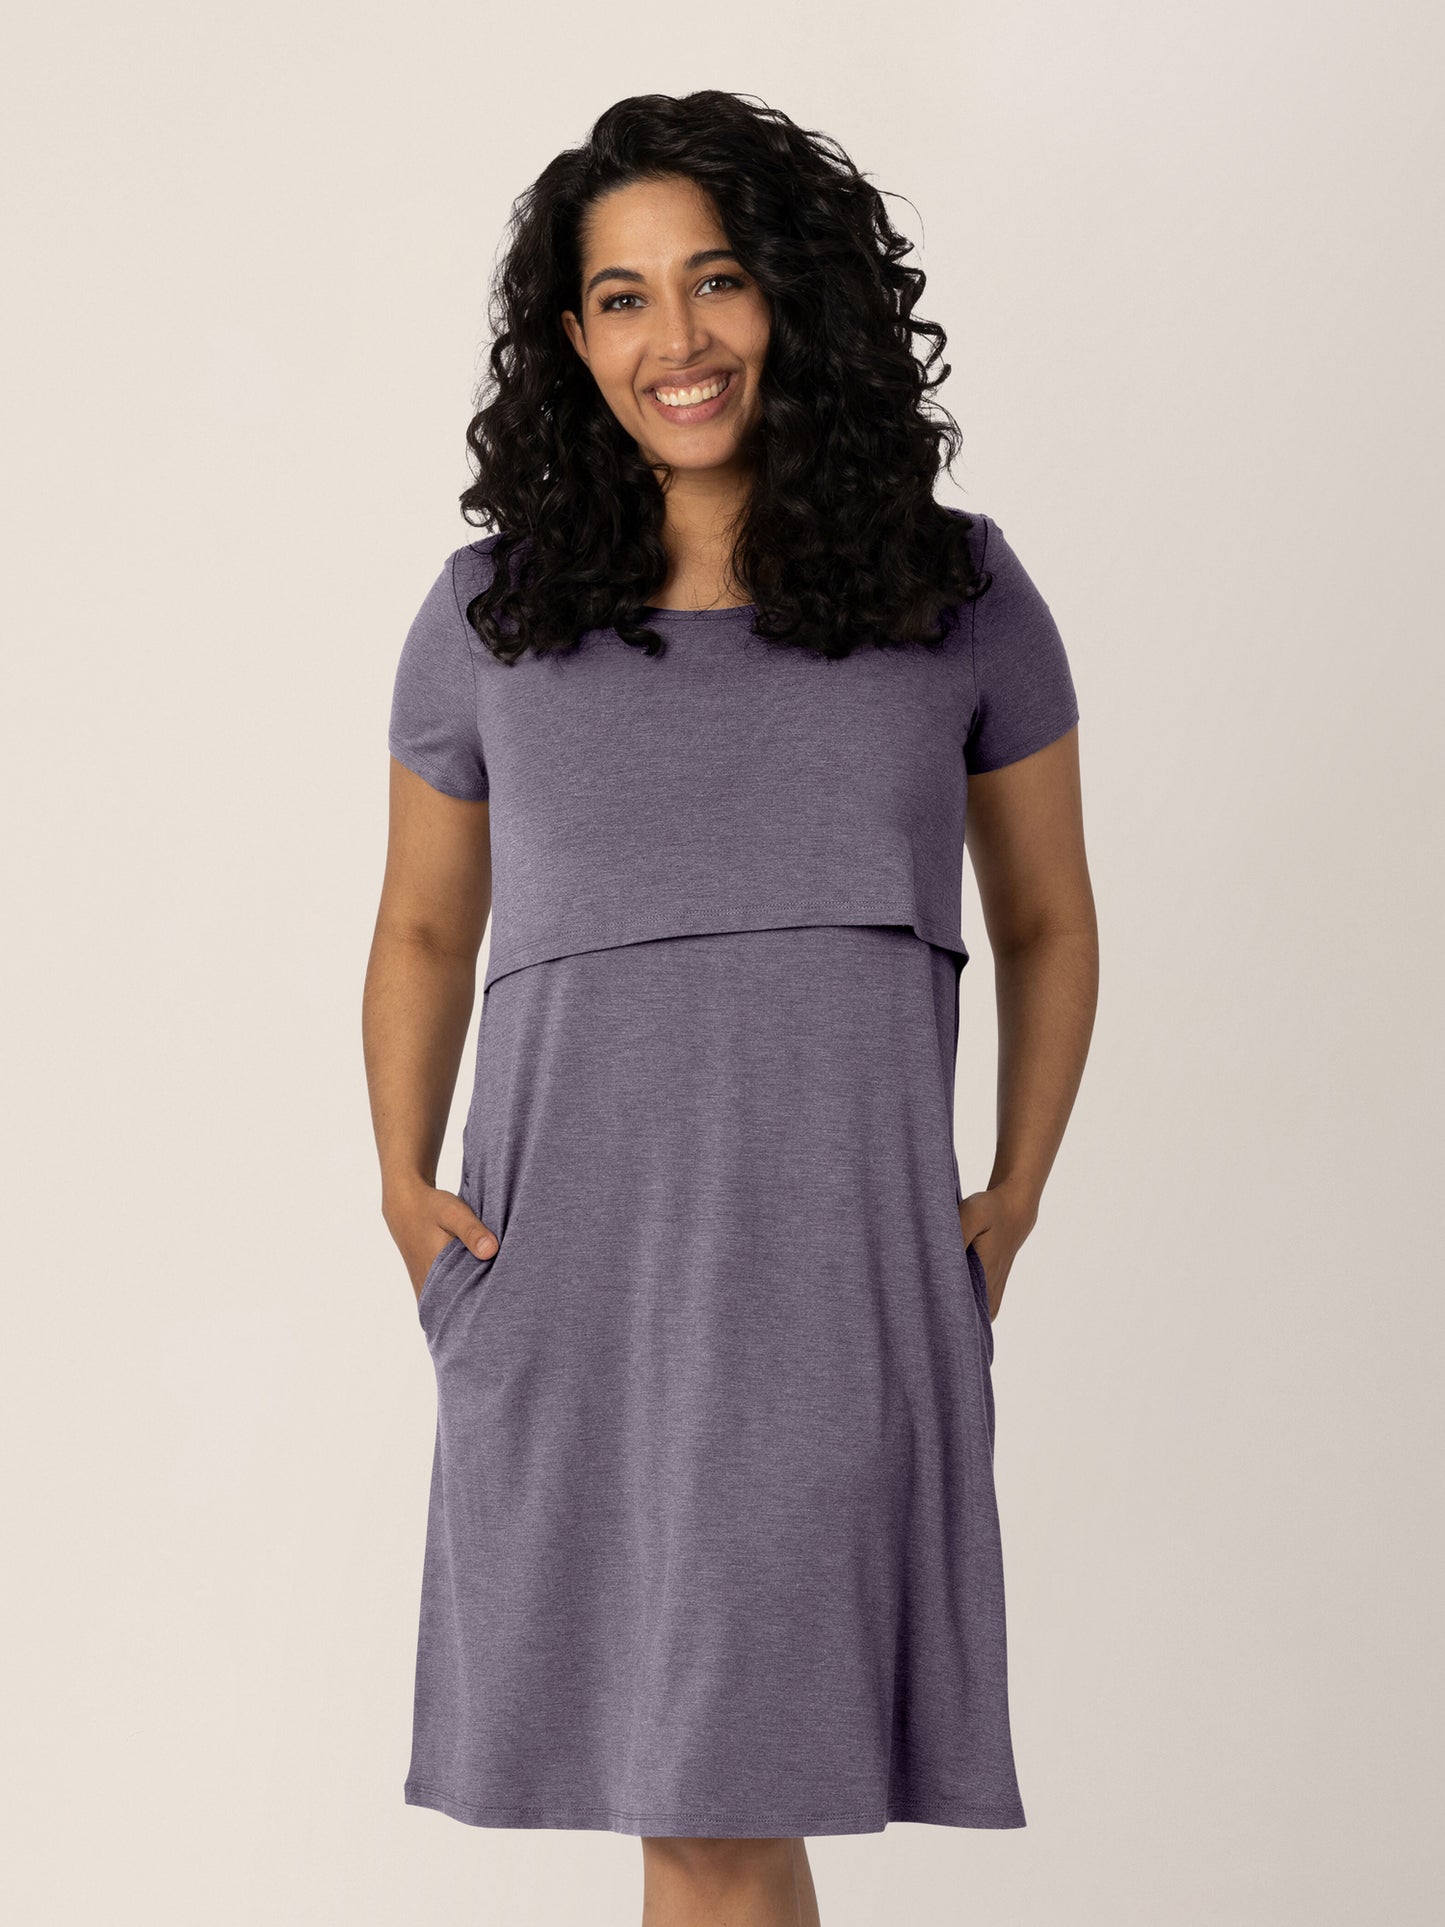 Model wearing the Eleanora Bamboo Maternity & Nursing Dress in Heathered Granite with her hands in her pocket. @model_info:Zakeeya is wearing a Small.